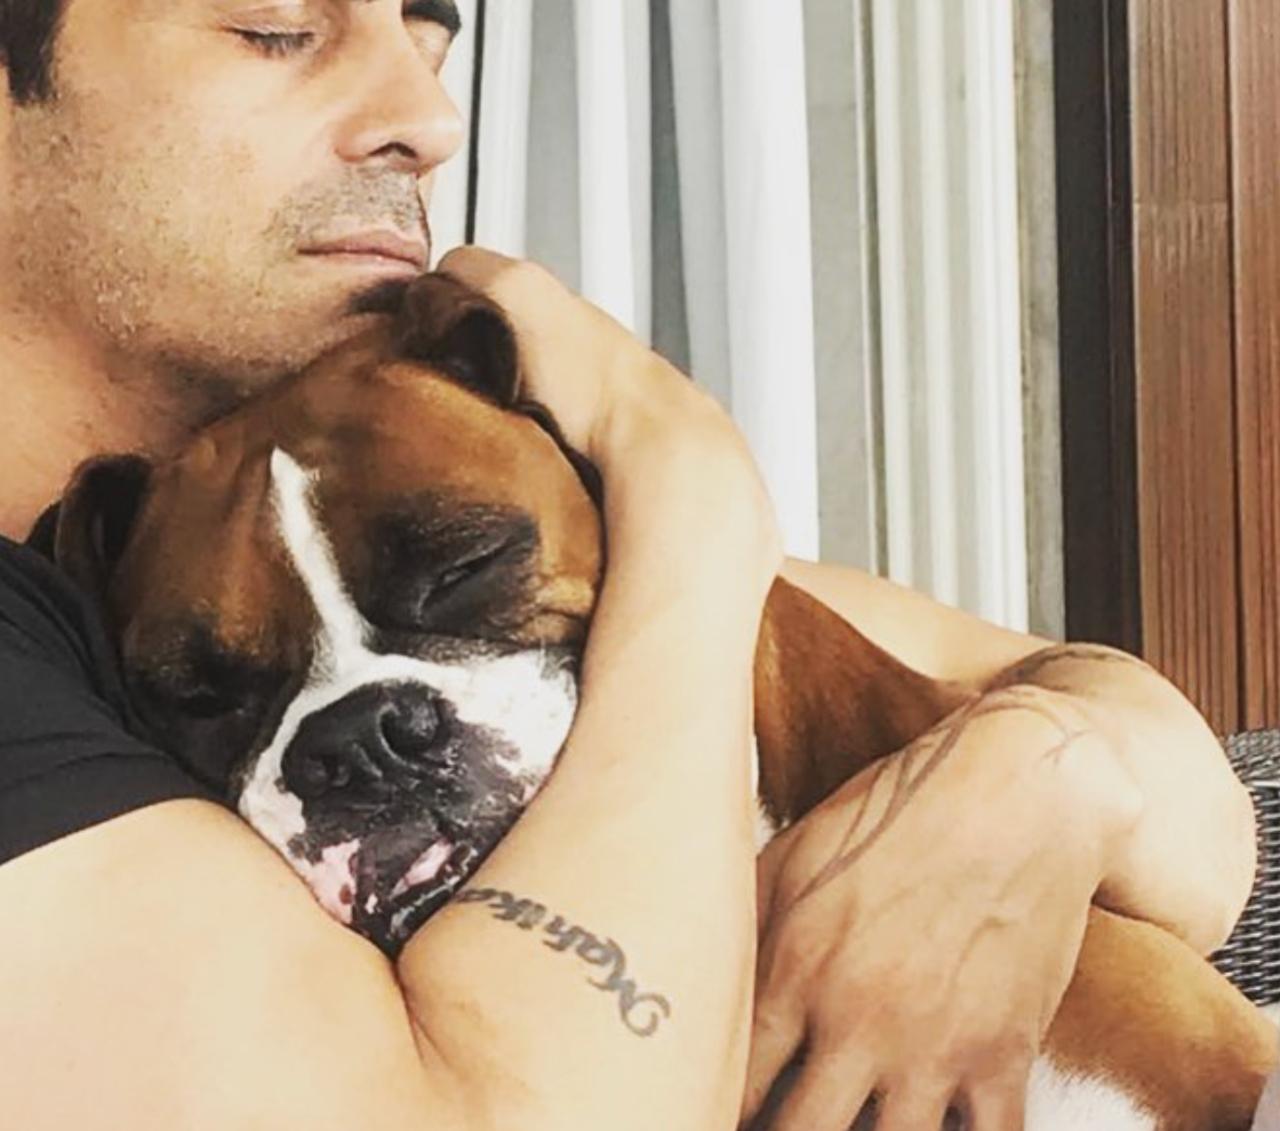 Upon the passing of his dog in 2018, Arjun Rampal took to Instagram to announce the passing of his beloved pet dog, Gangsta. The actor posted a heartfelt picture of himself with his cherished 'best friend' in memory of their special bond.